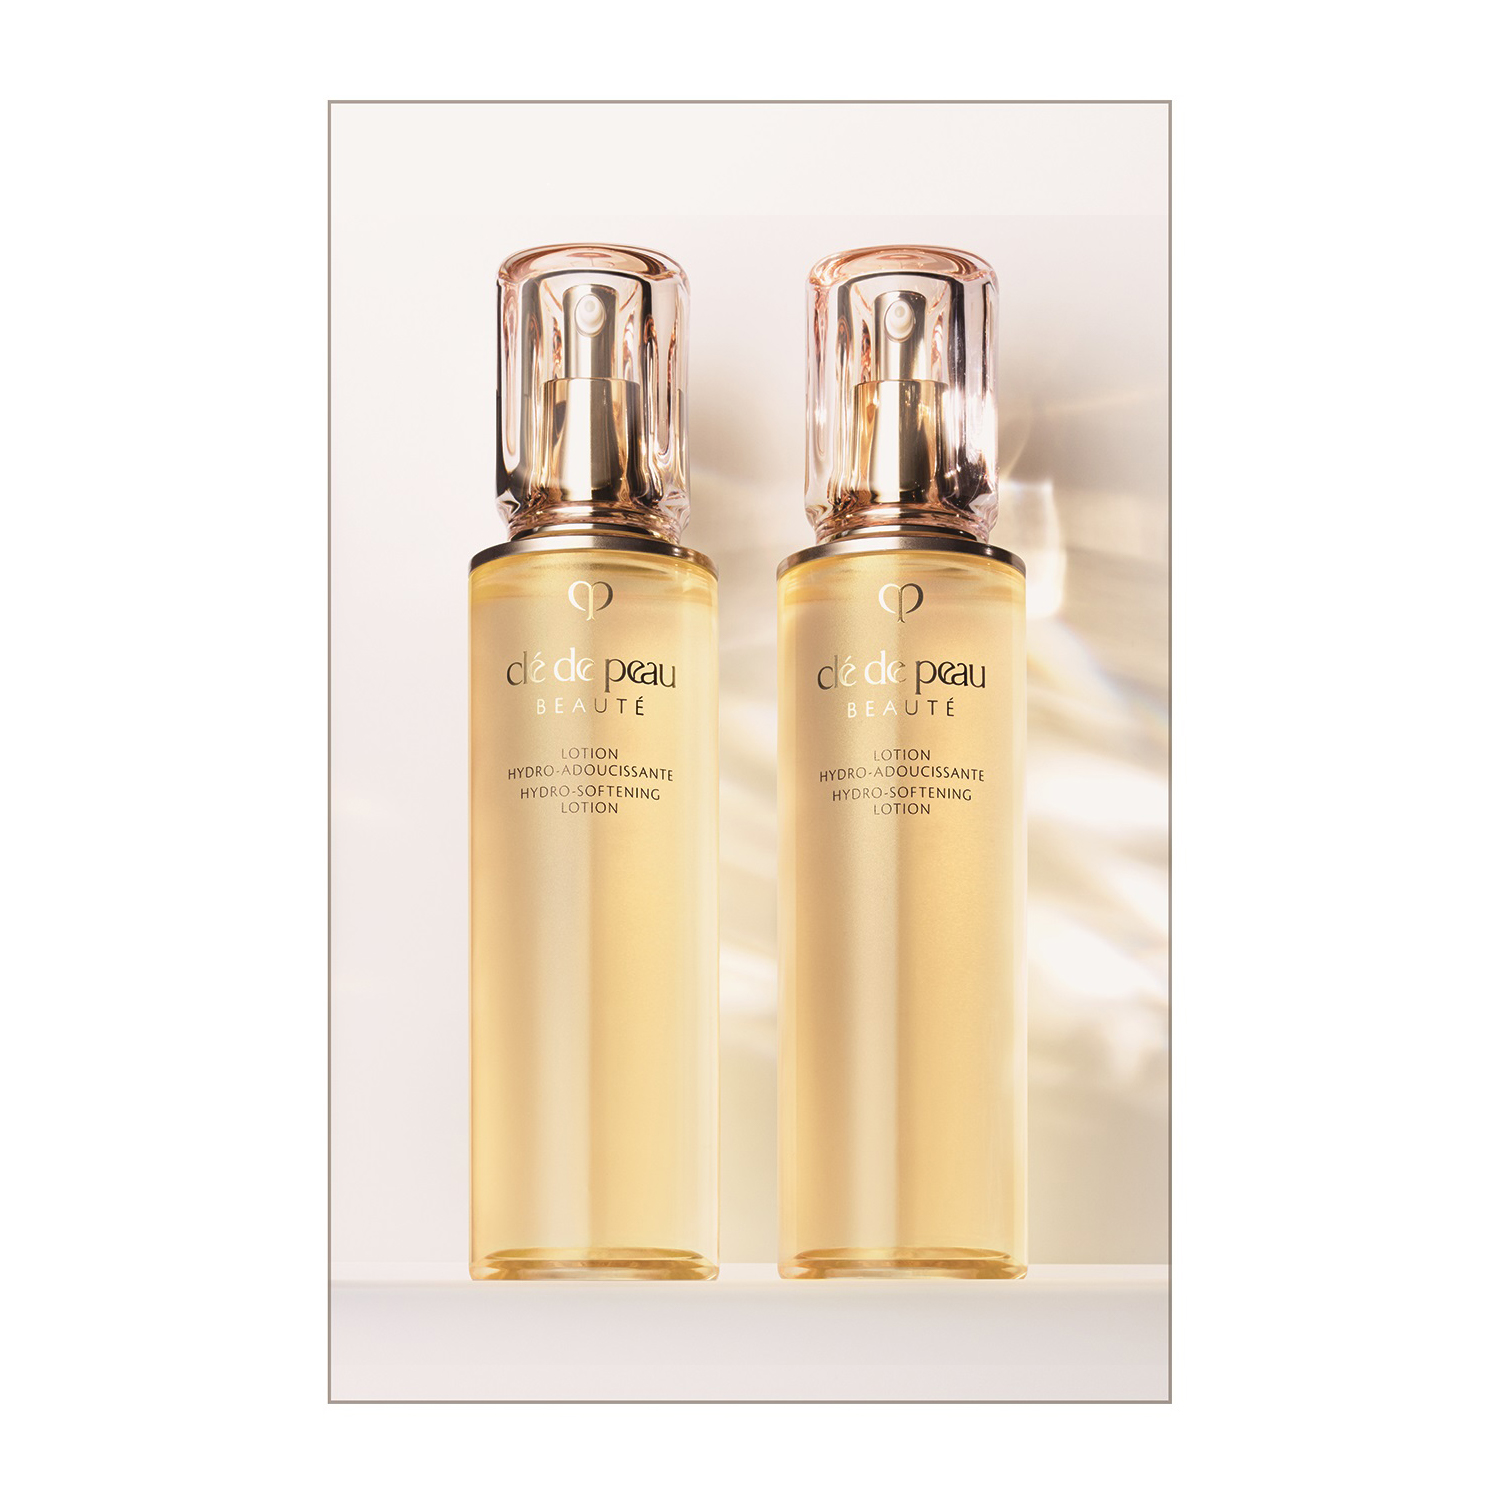 Hydro-Softening Lotion DUO